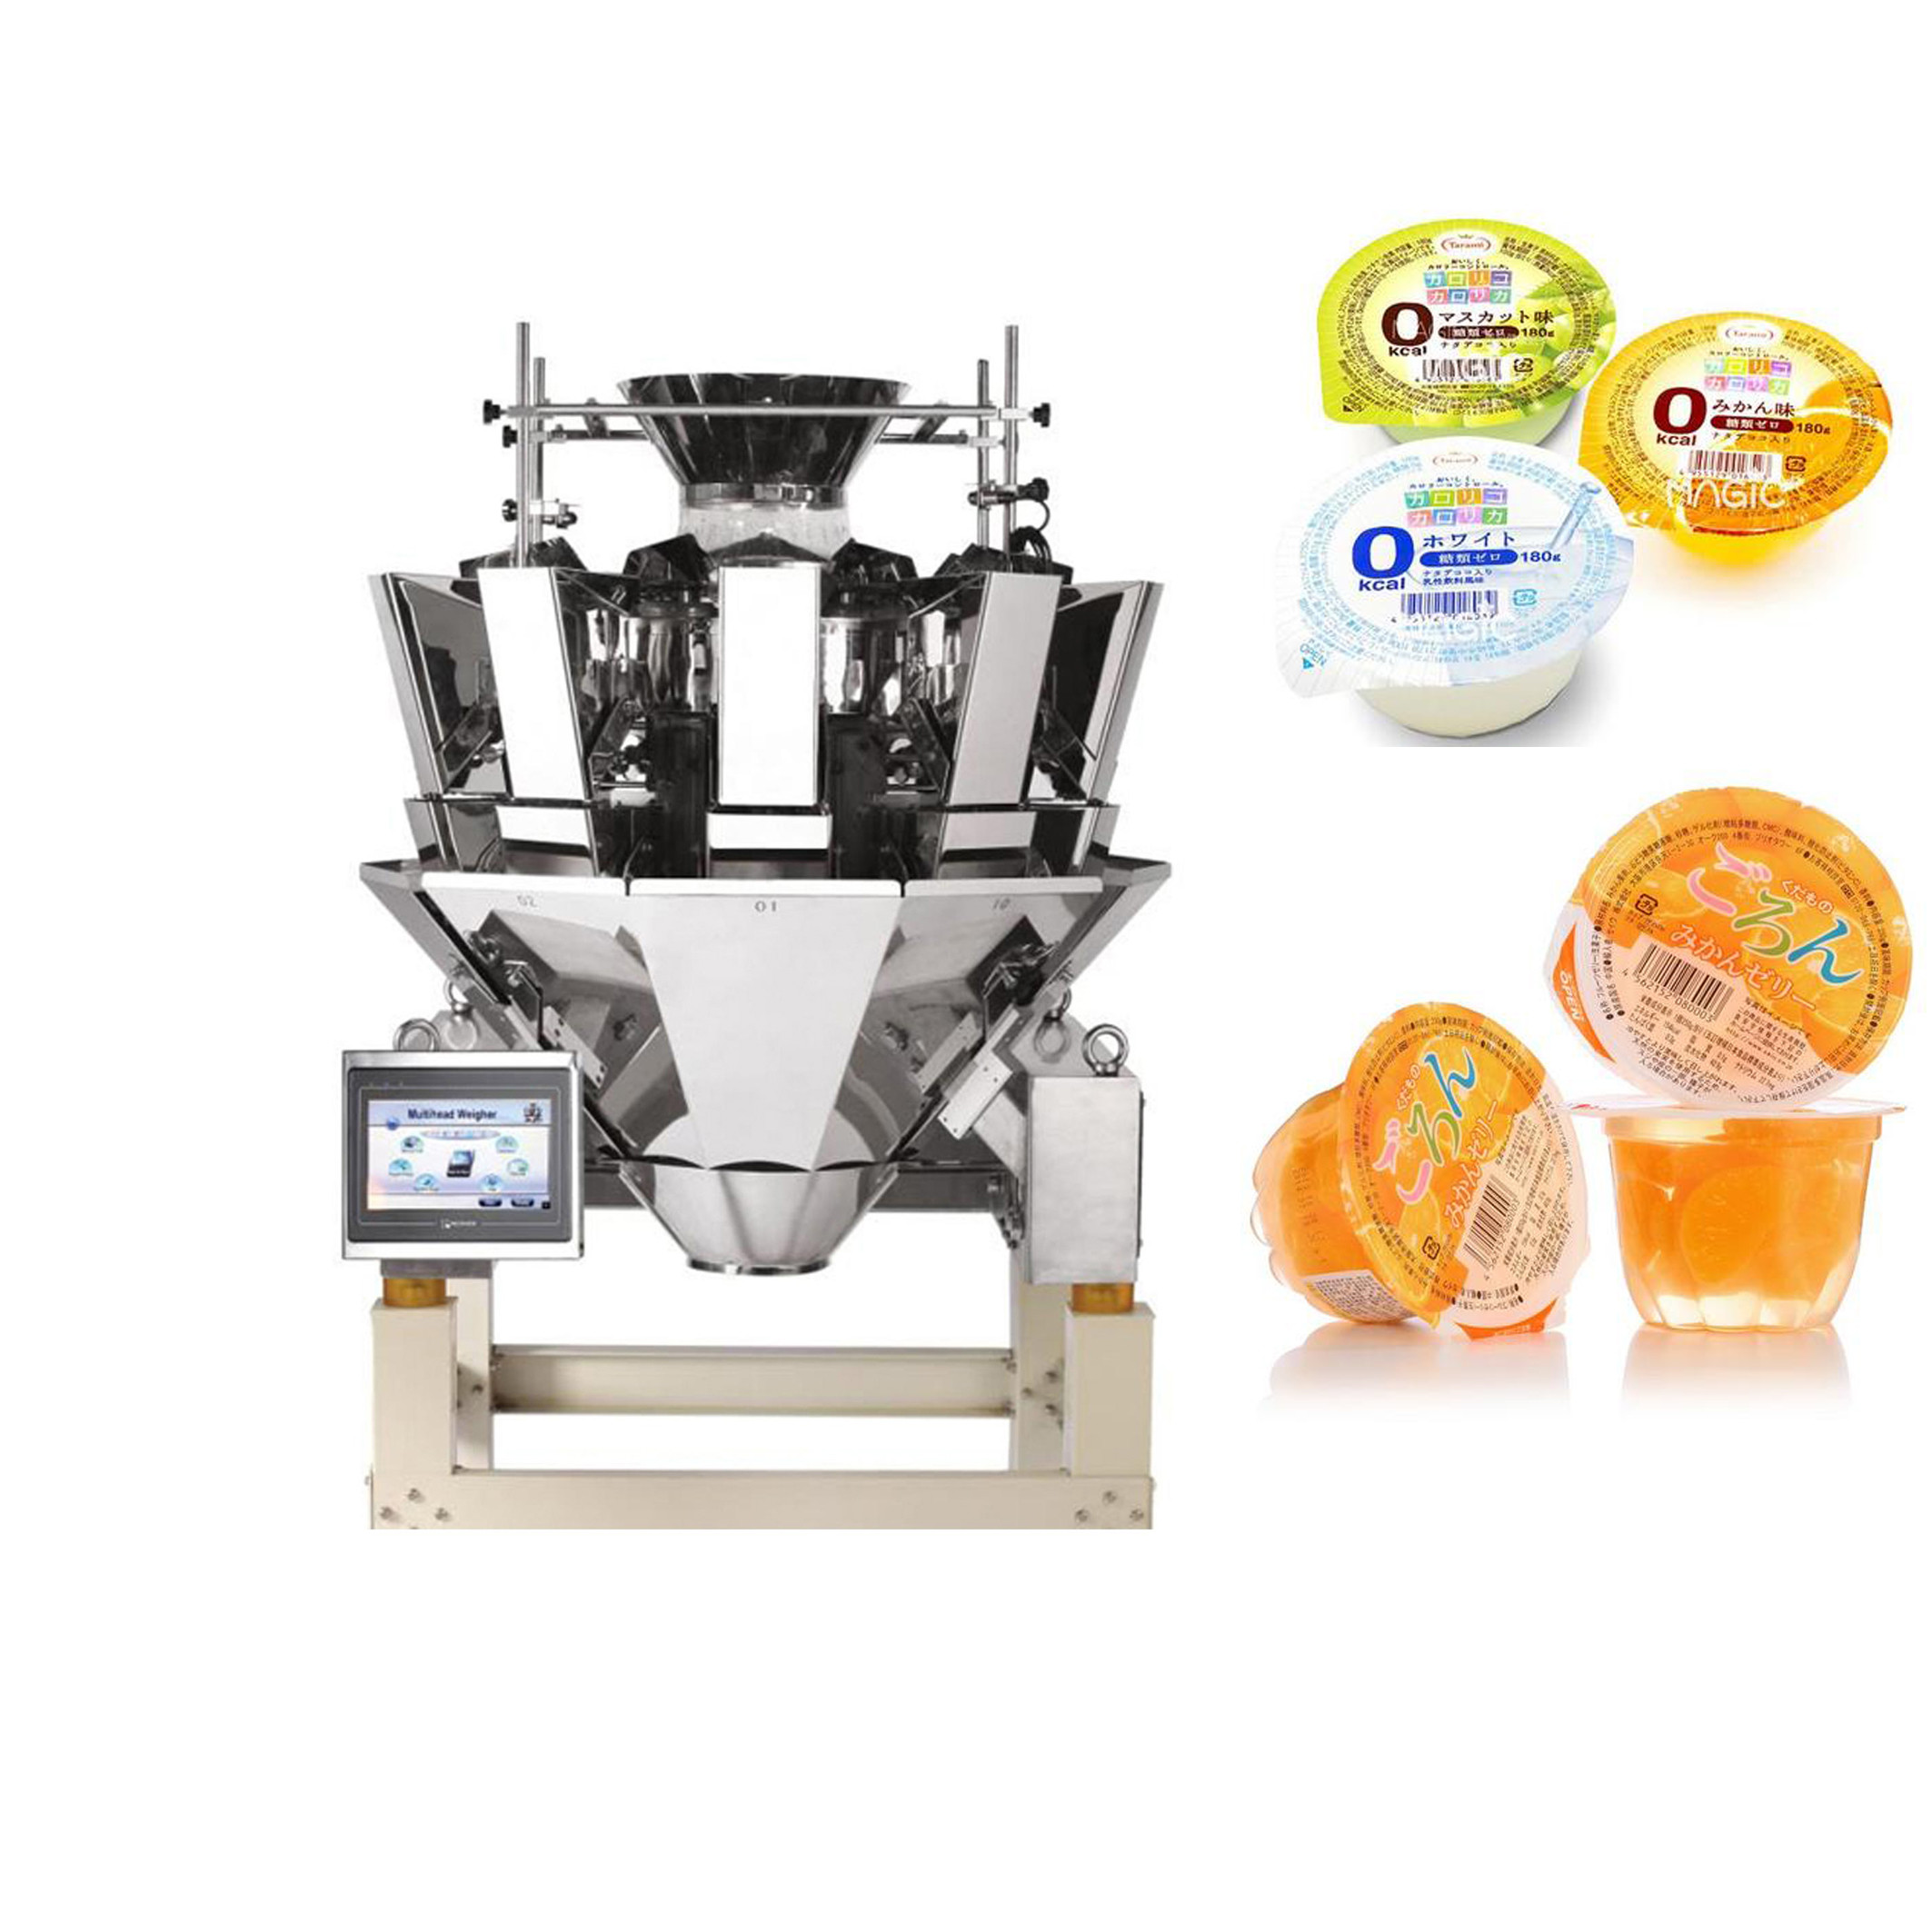 Candy Weighing 200g Multihead Weigher Packing Machine Full Automatic